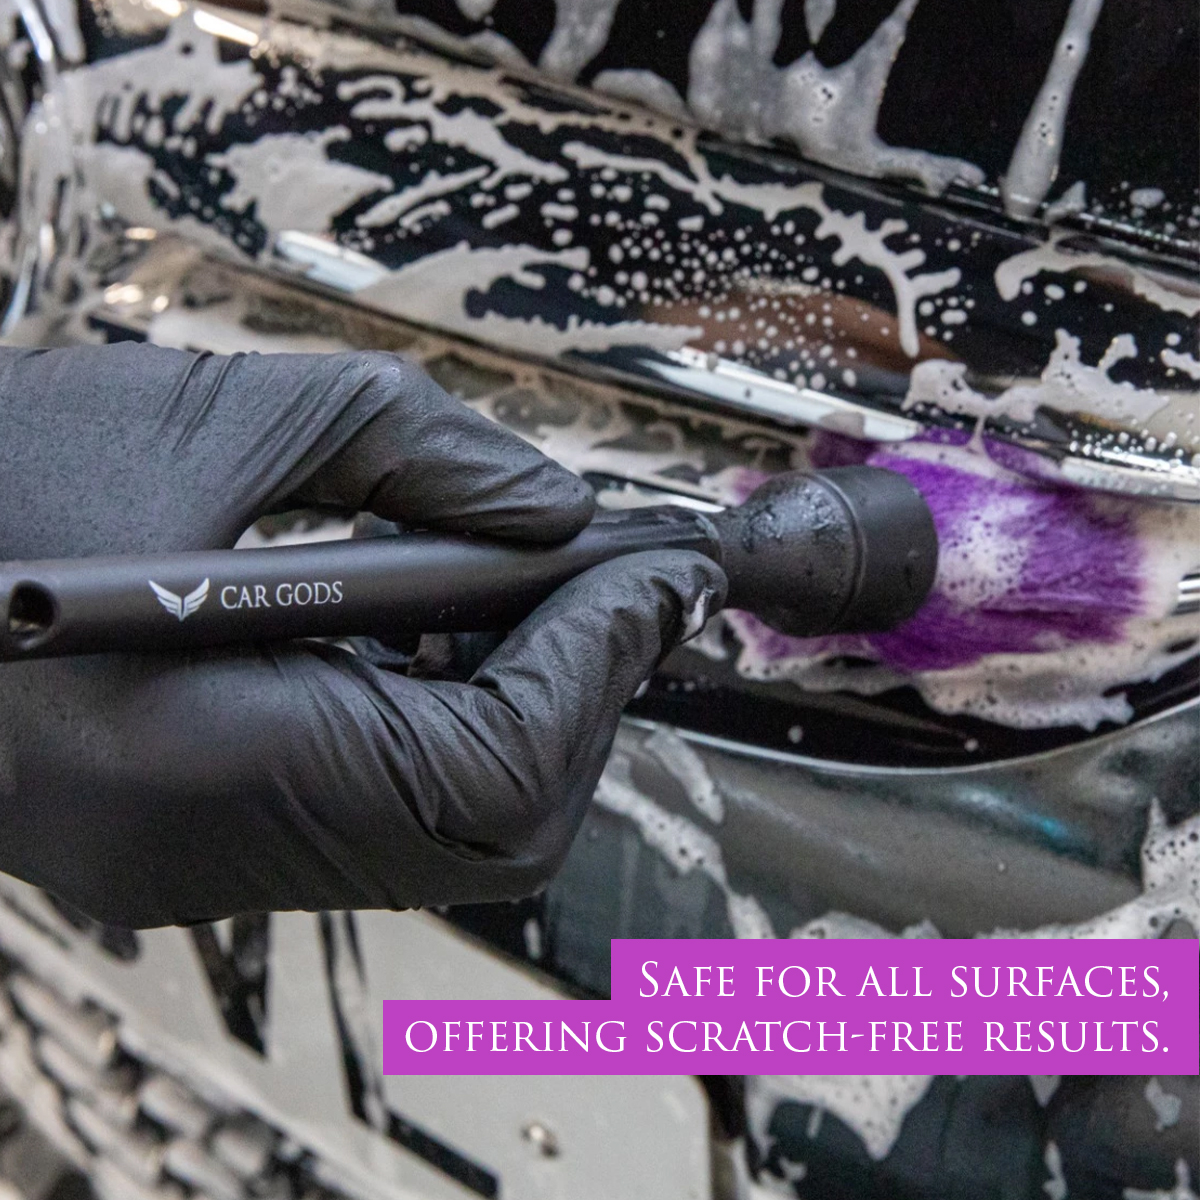 Two ultra-soft Car Gods Feathertip Detailing Brushes are safe for all surfaces, offering scratch-free results